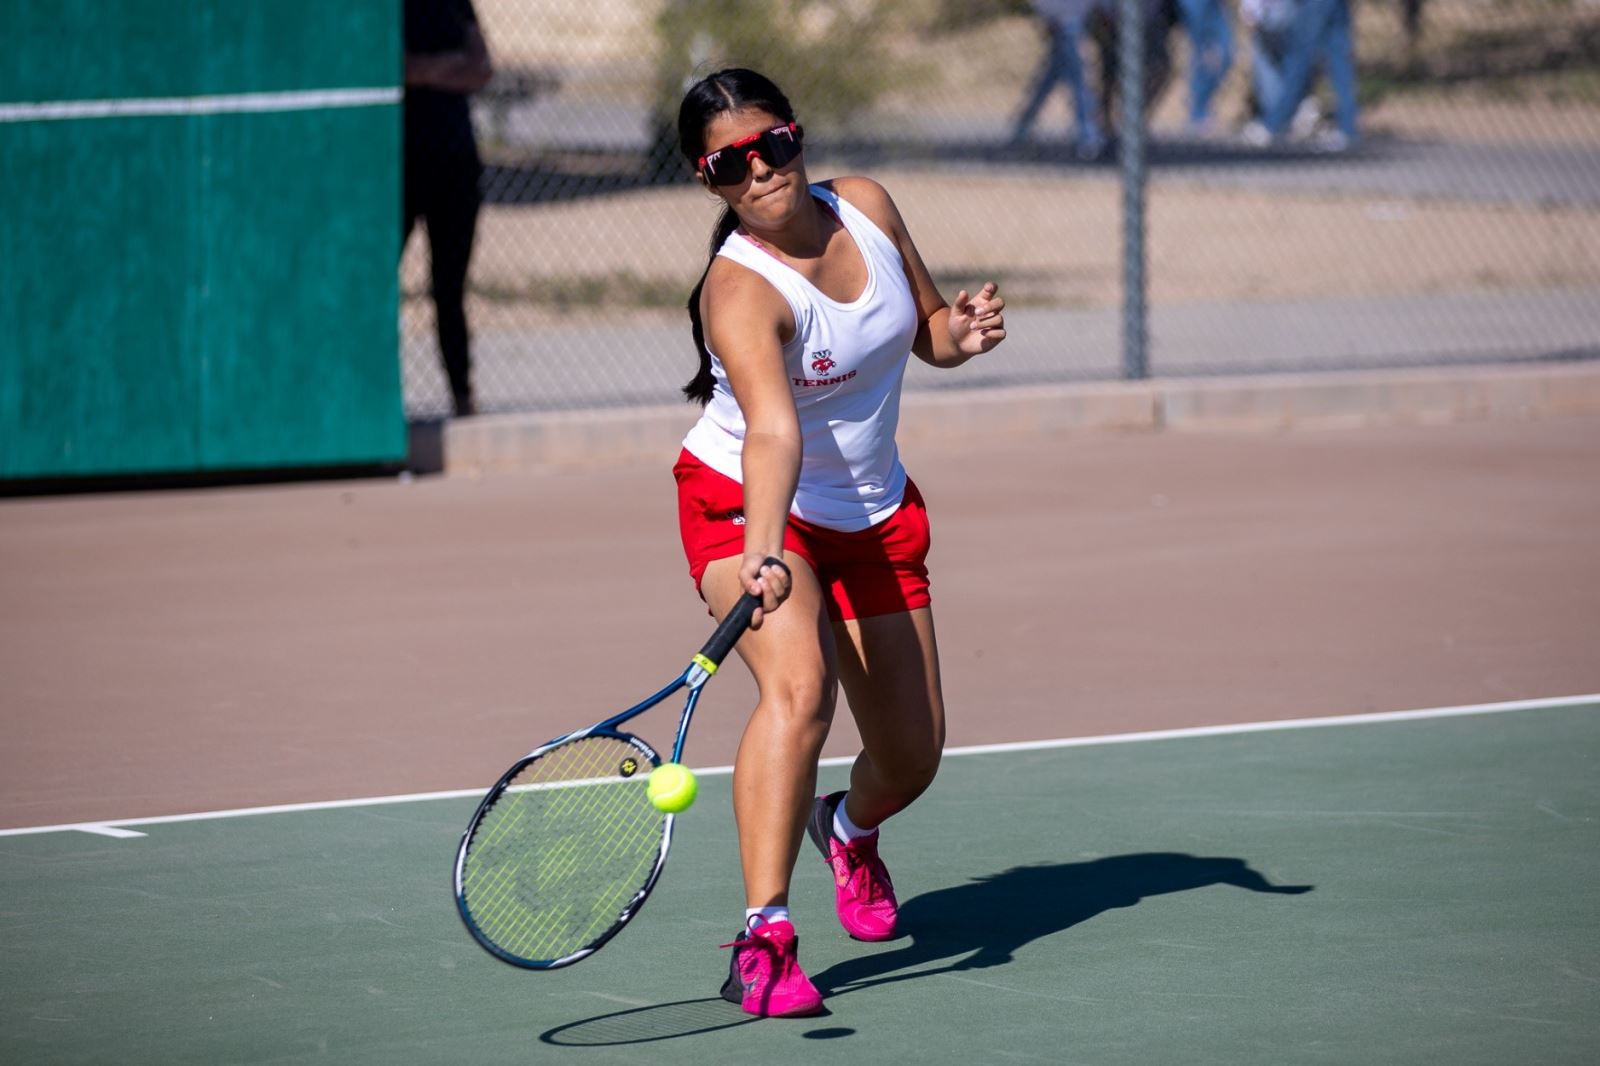 A THMS girls tennis player aims her racquet low to hit the ball.